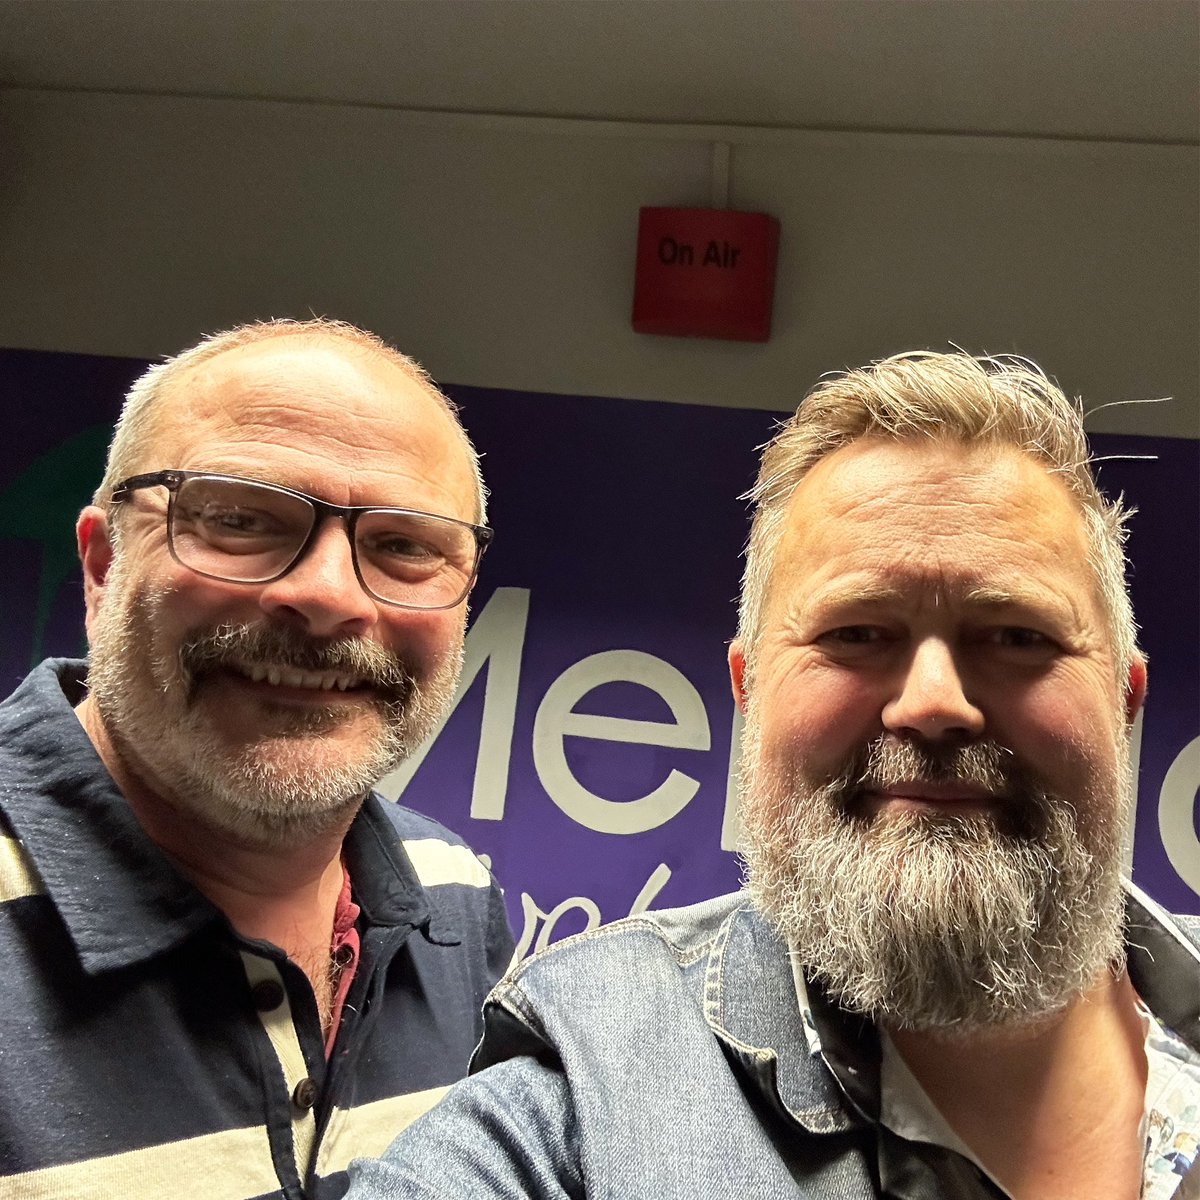 Well that was fun, big thank you to @leader_music for inviting me along to chat and play a few tunes and listen to a lot of great songs, particularly liked being introduced after Robert Vincent’s new song Burden. ❤️ #americana #folk #country #107meridianfm